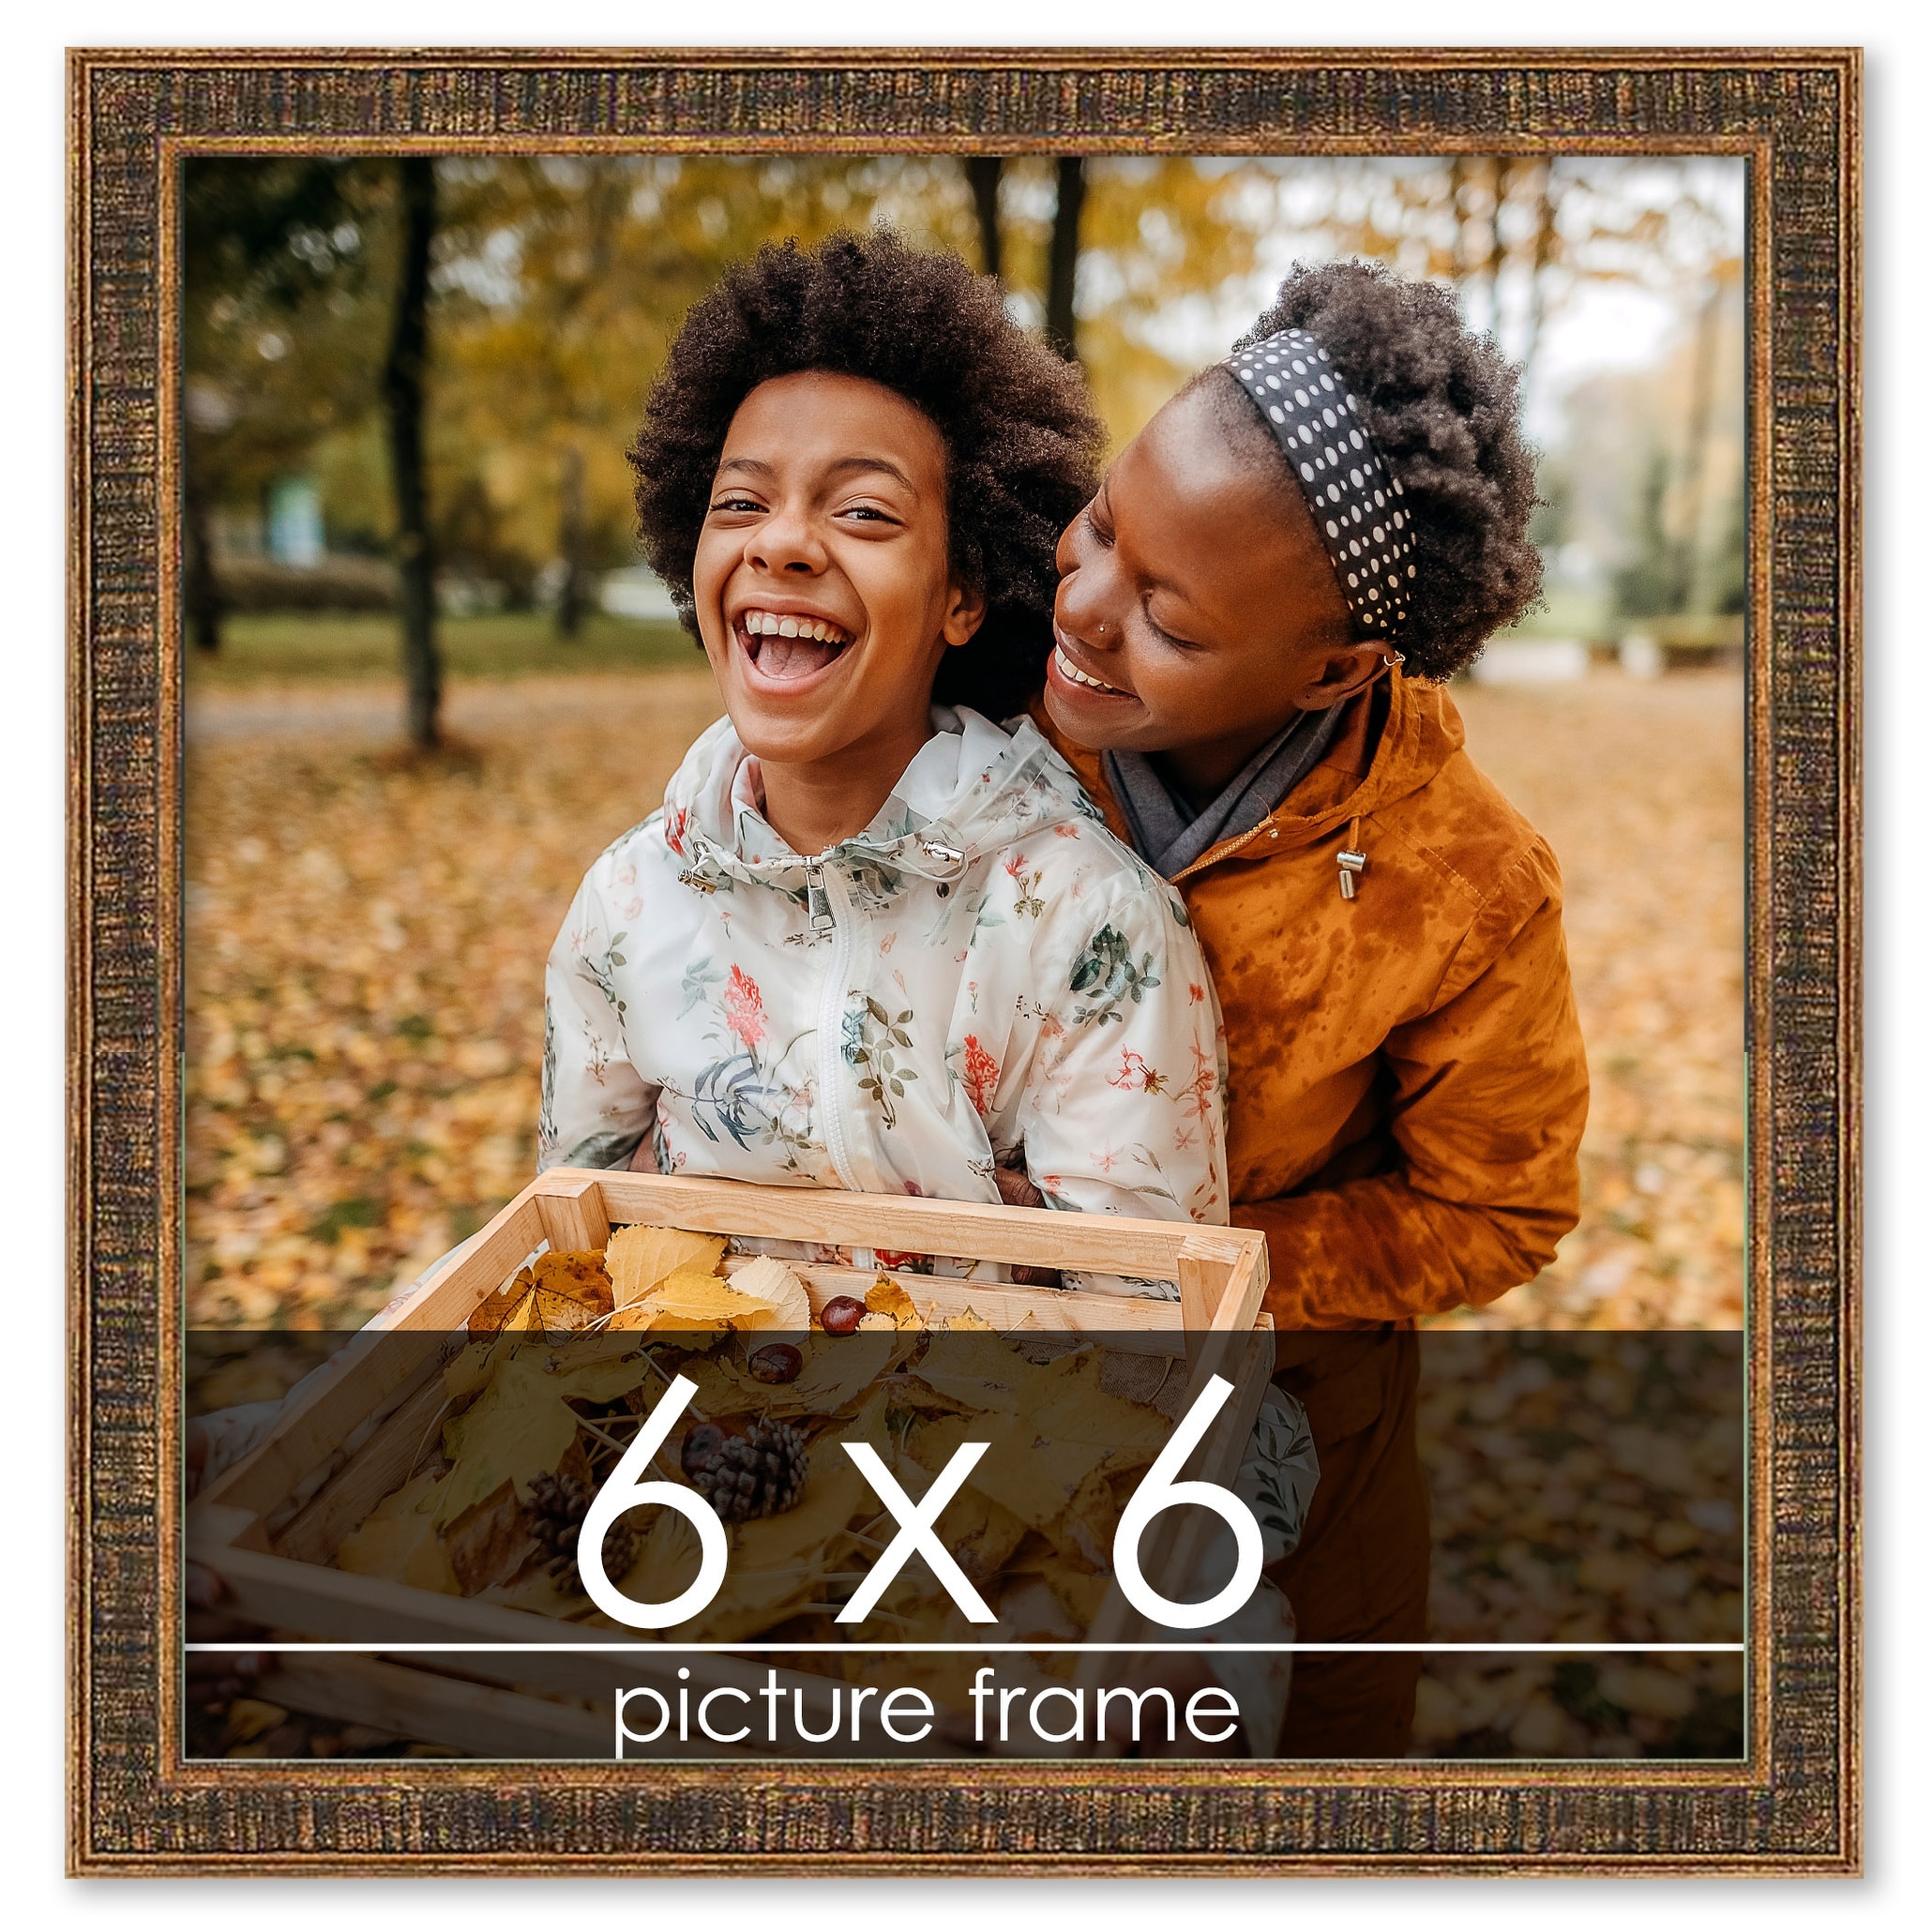 Poster Palooza 6x6 Frame Black Solid Wood Picture Square Frame Includes UV  Acrylic, Foam Board Backing & Hanging Hardware